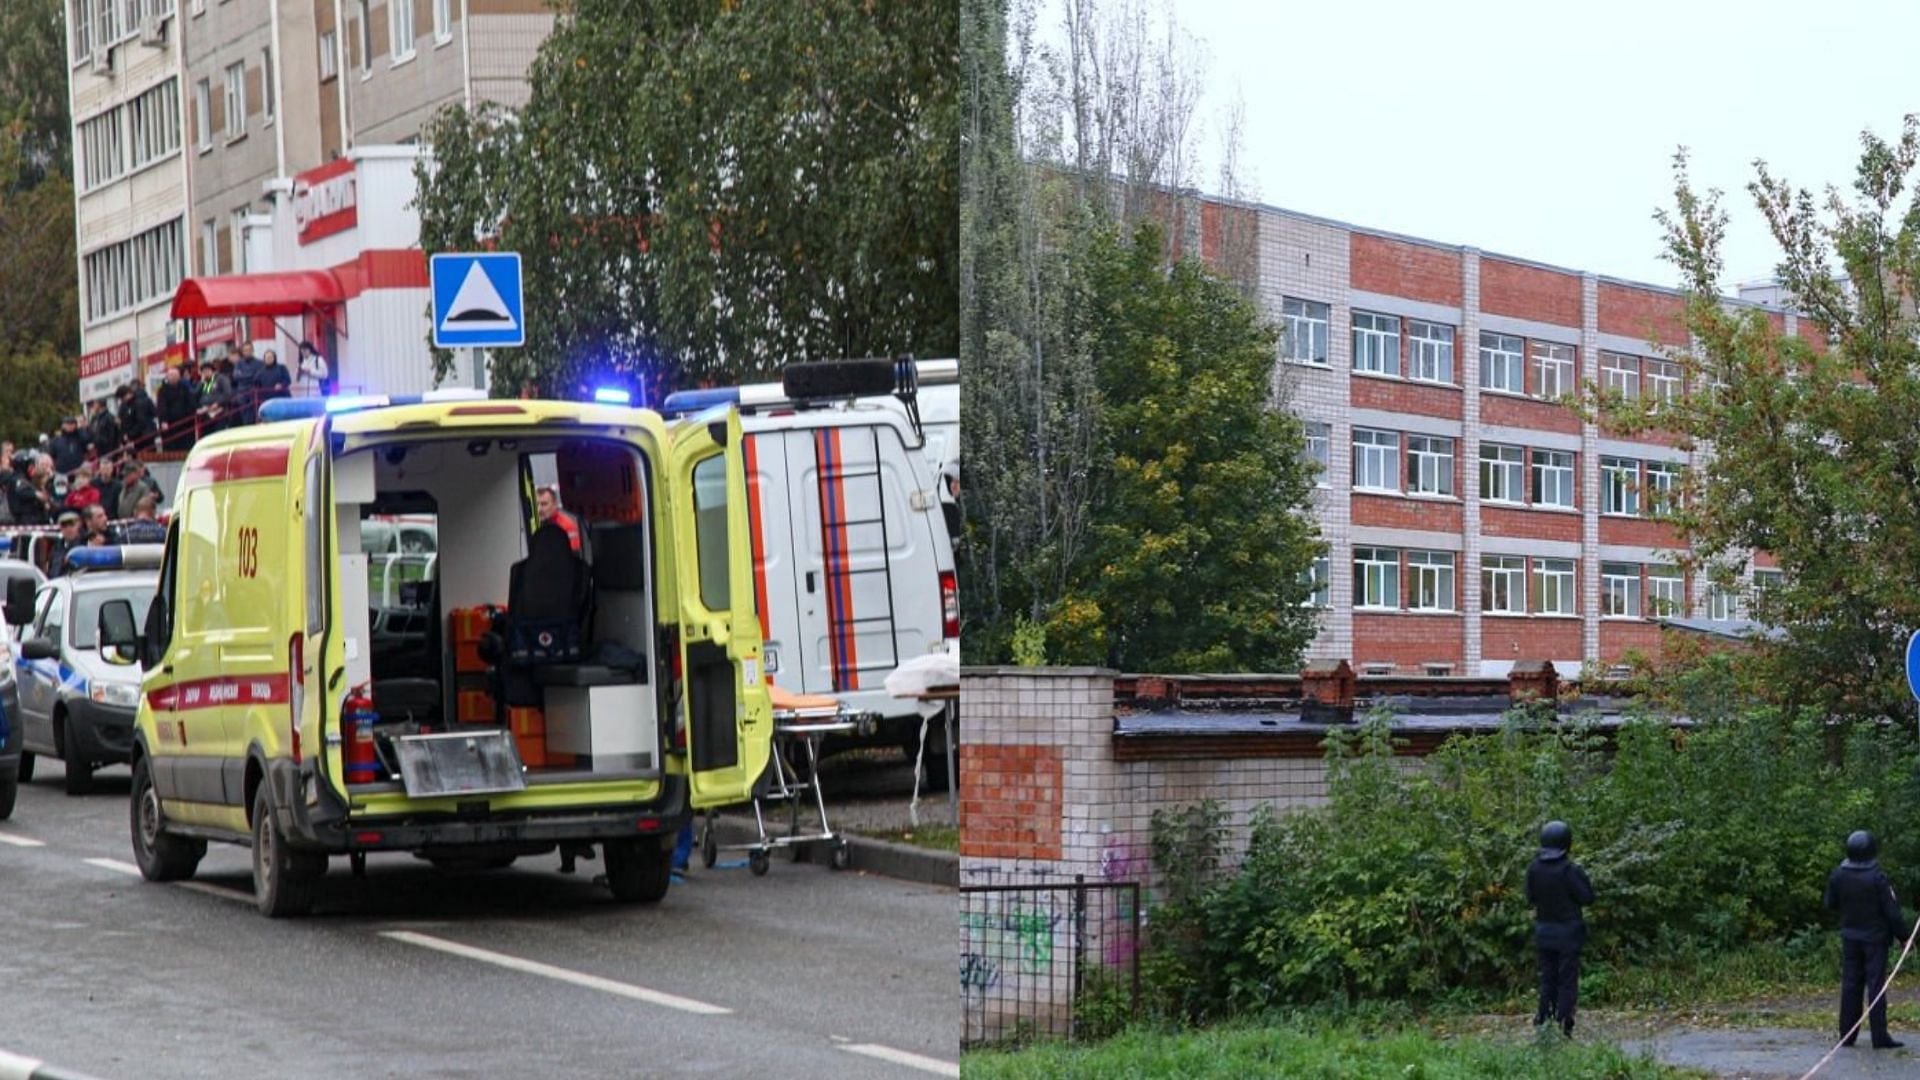 A school shooting in Russia on Monday left multiple children dead (Images via Twitter/Reuters)